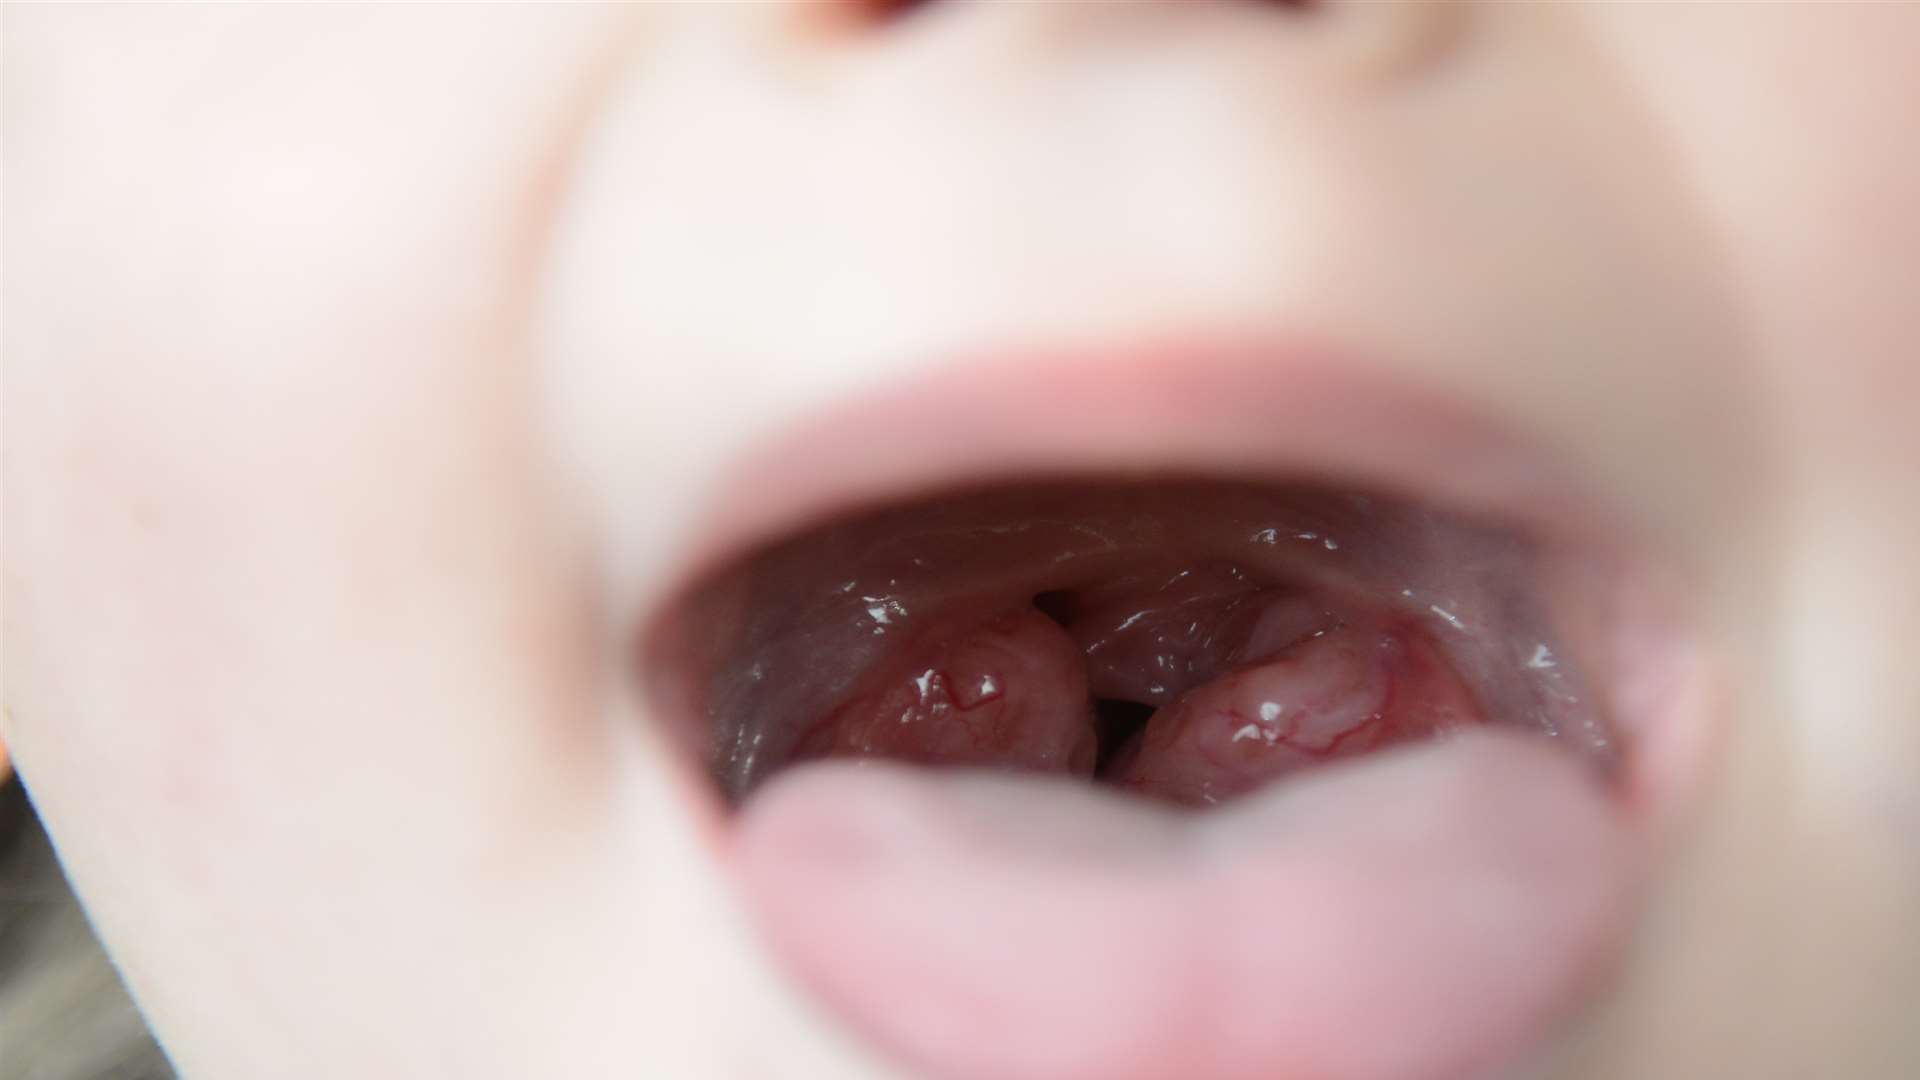 Ellie-Mae's tonsils are so swollen she struggles to eat and sleep